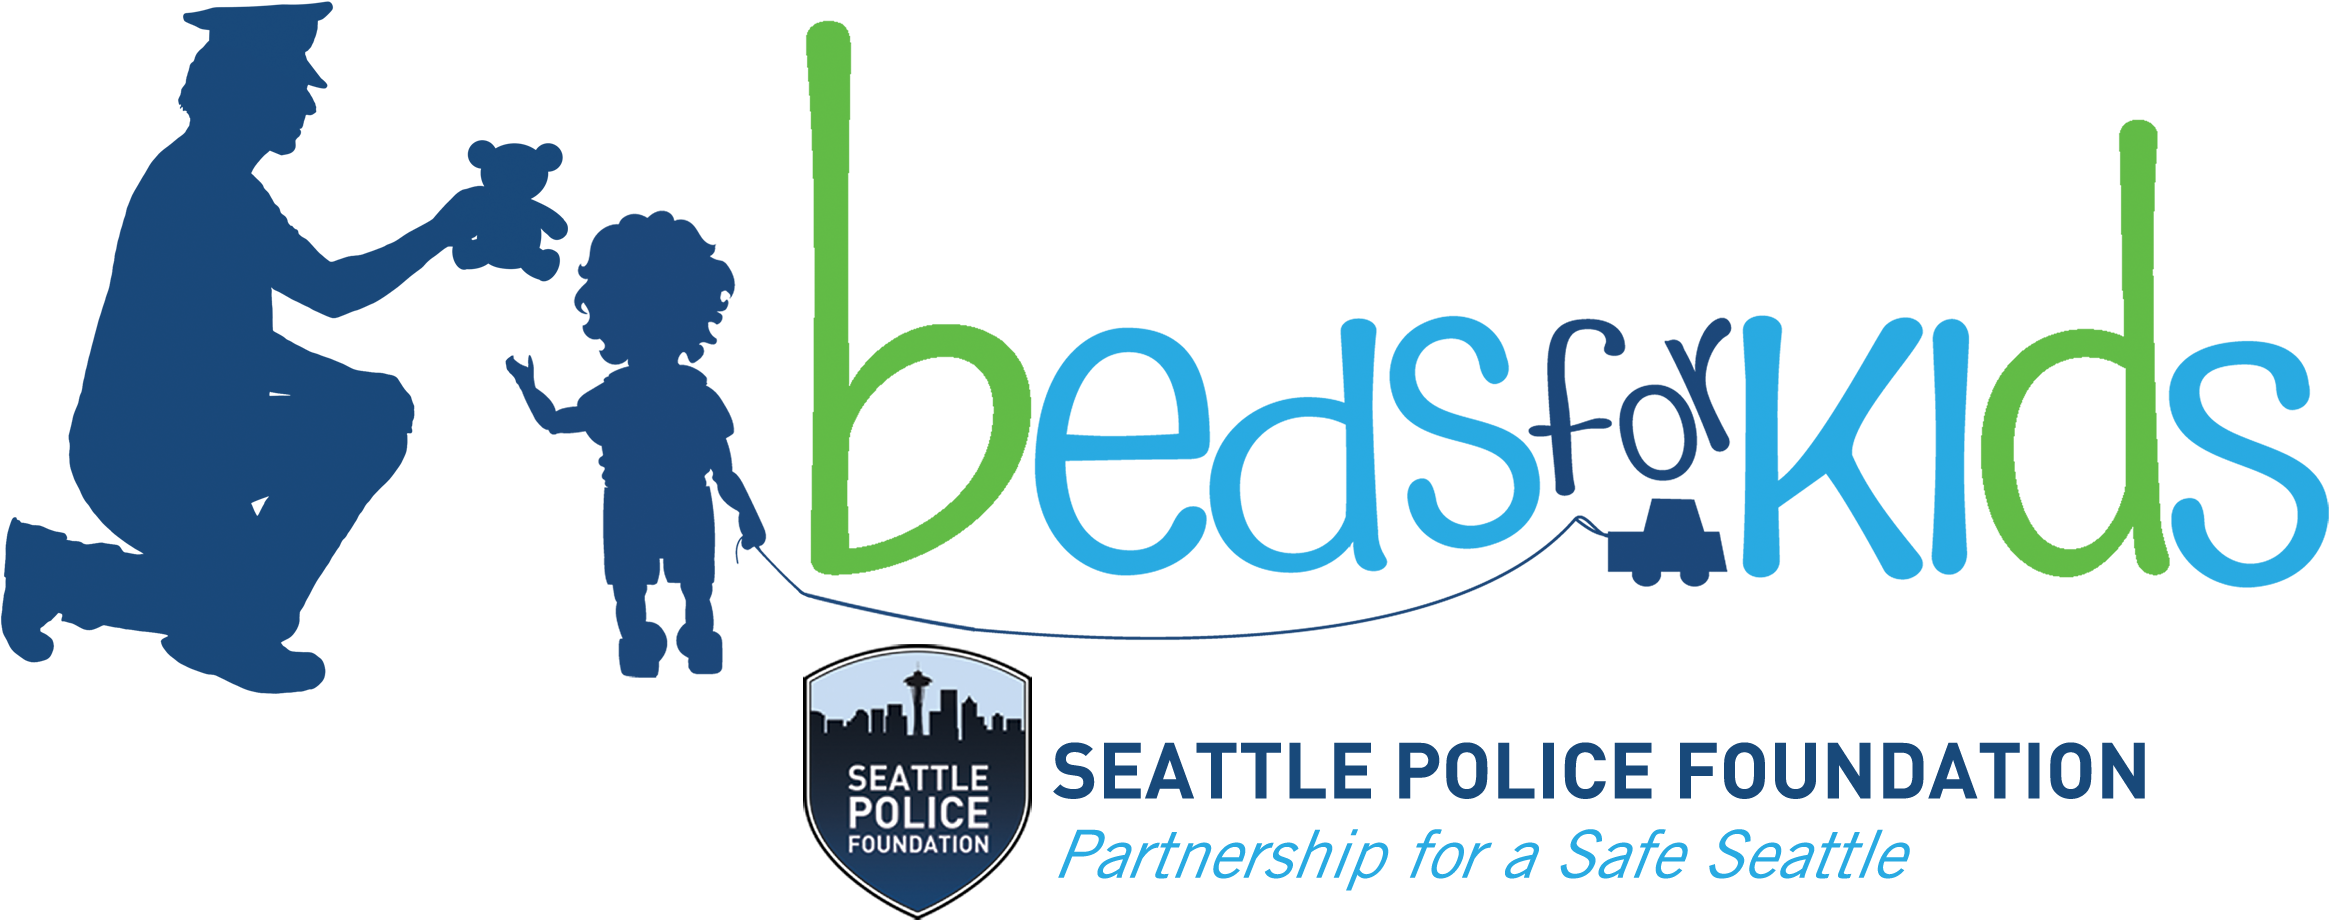 Beds For Kids Project - Seattle Police Foundation (2625x1050)